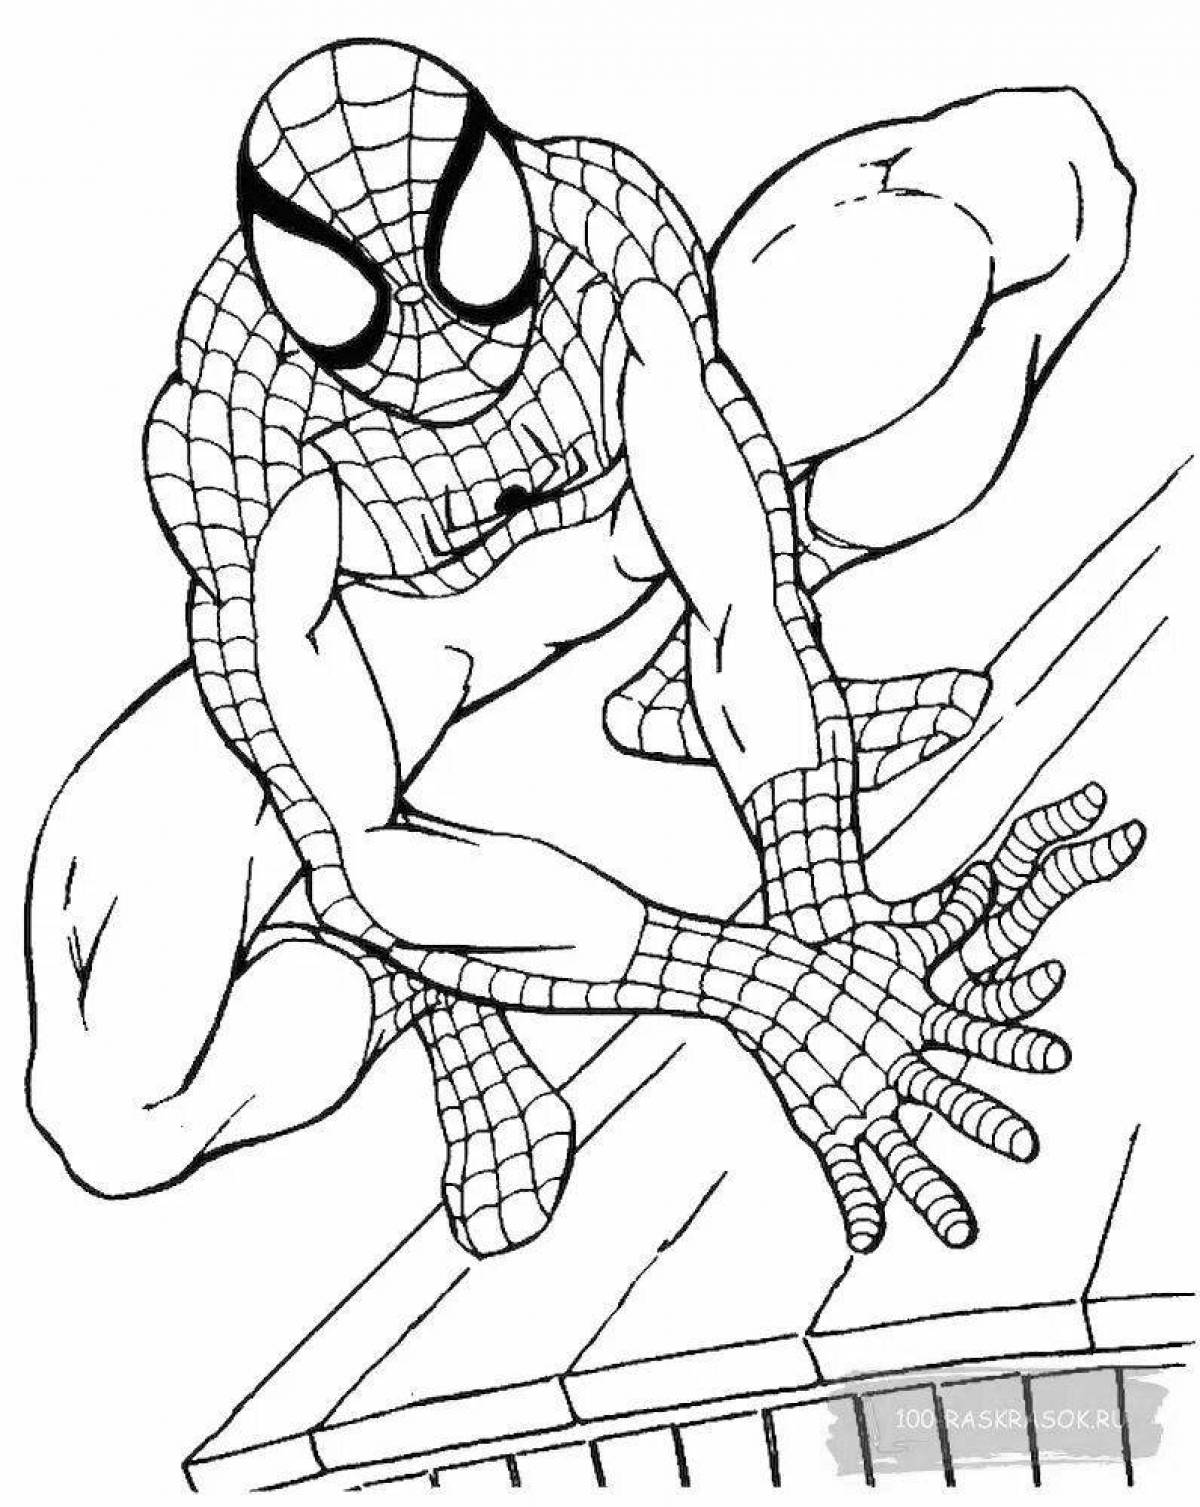 Excellent spiderman coloring page for kids